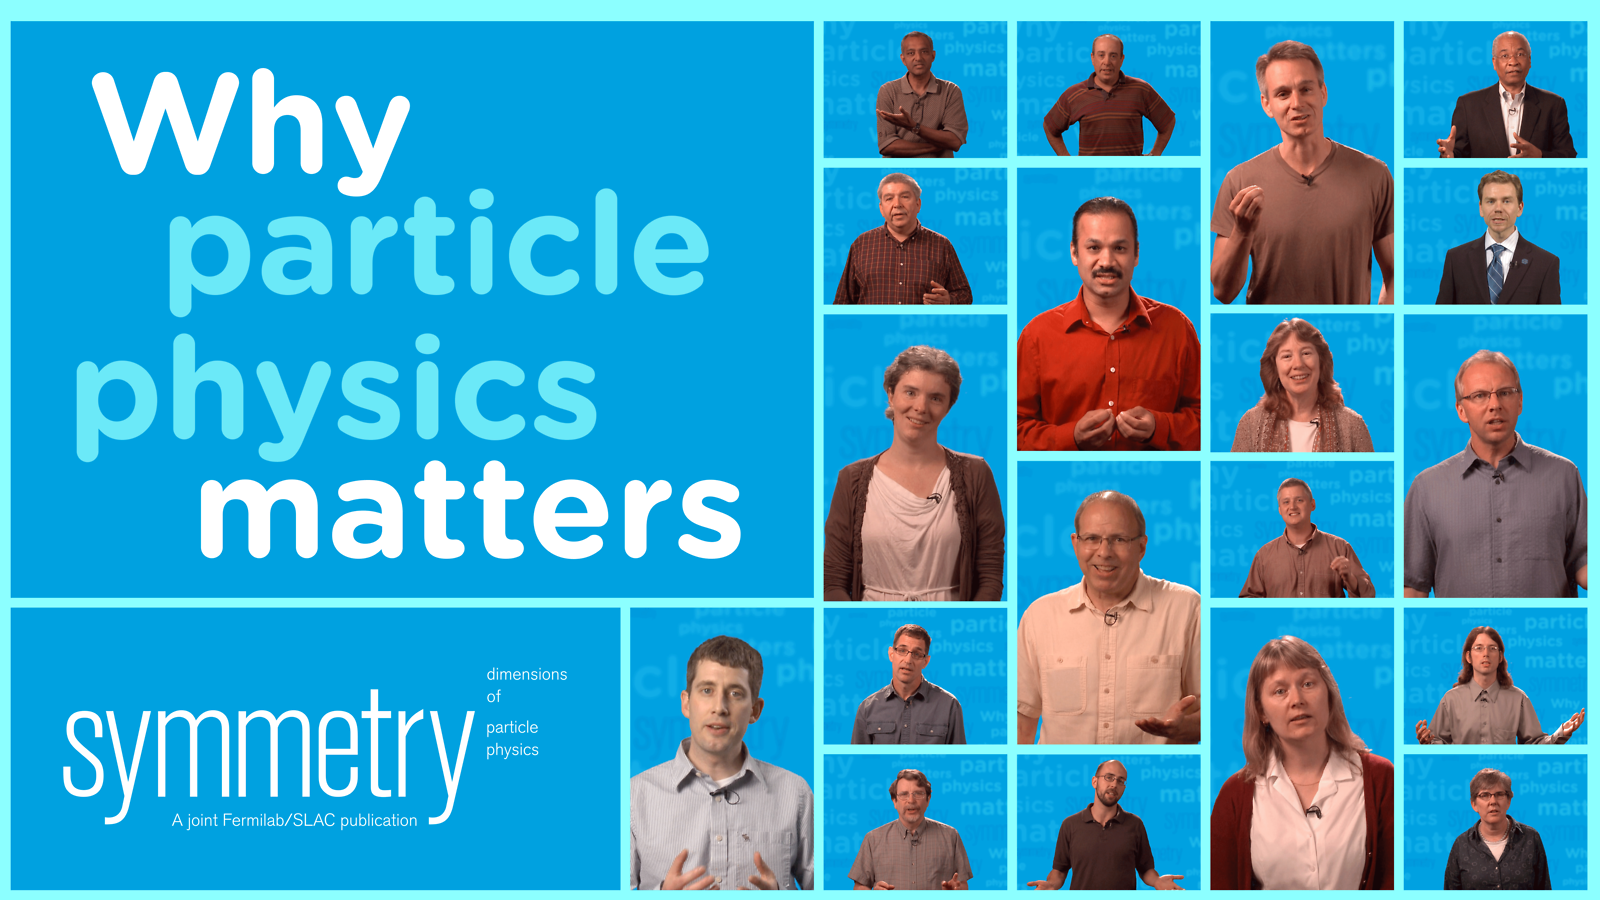 Illustration of "Why particle physics matters" and photo collage of physicists